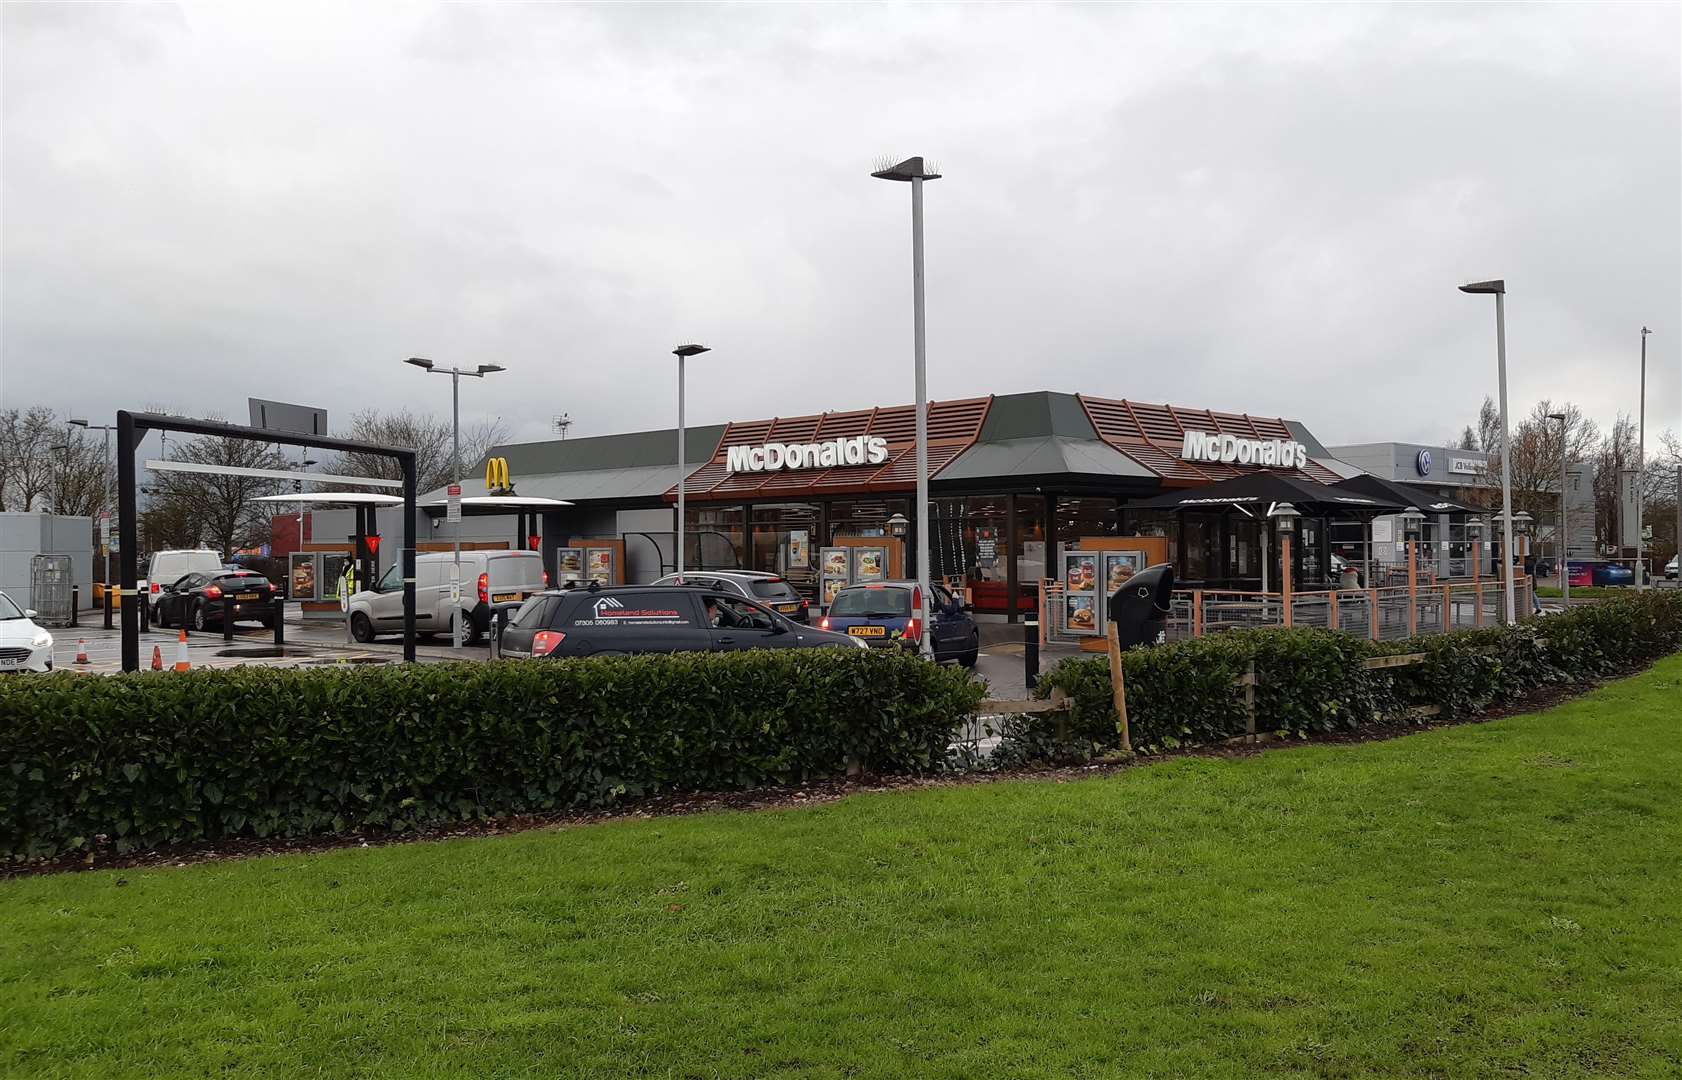 The ever-busy Ashford Orbital Park McDonald's is next to the roundabout